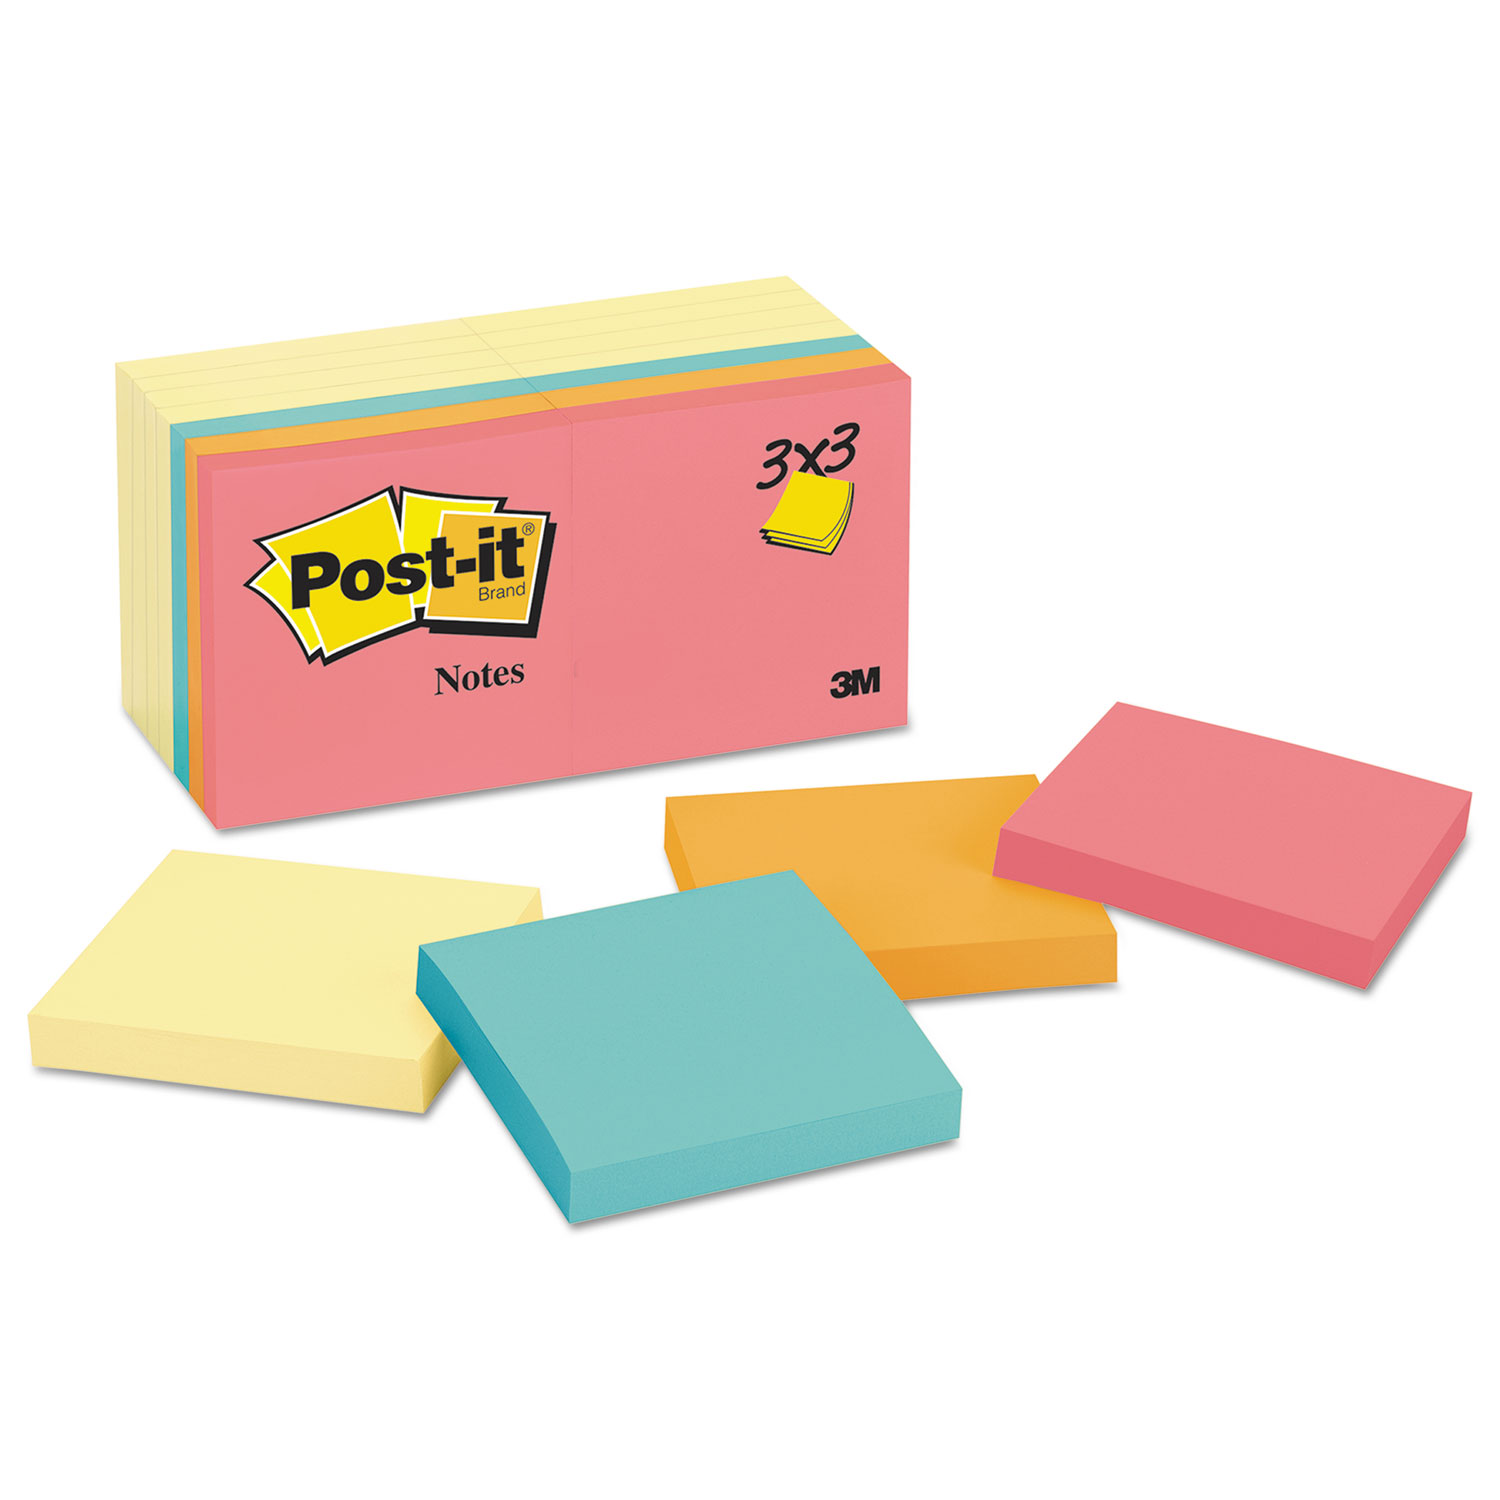  Post-it Notes 654-14YWM Original Pads Value Pack, 3 x 3, Canary Yellow/Cape Town, 100-Sheet, 14 Pads (MMM65414YWM) 